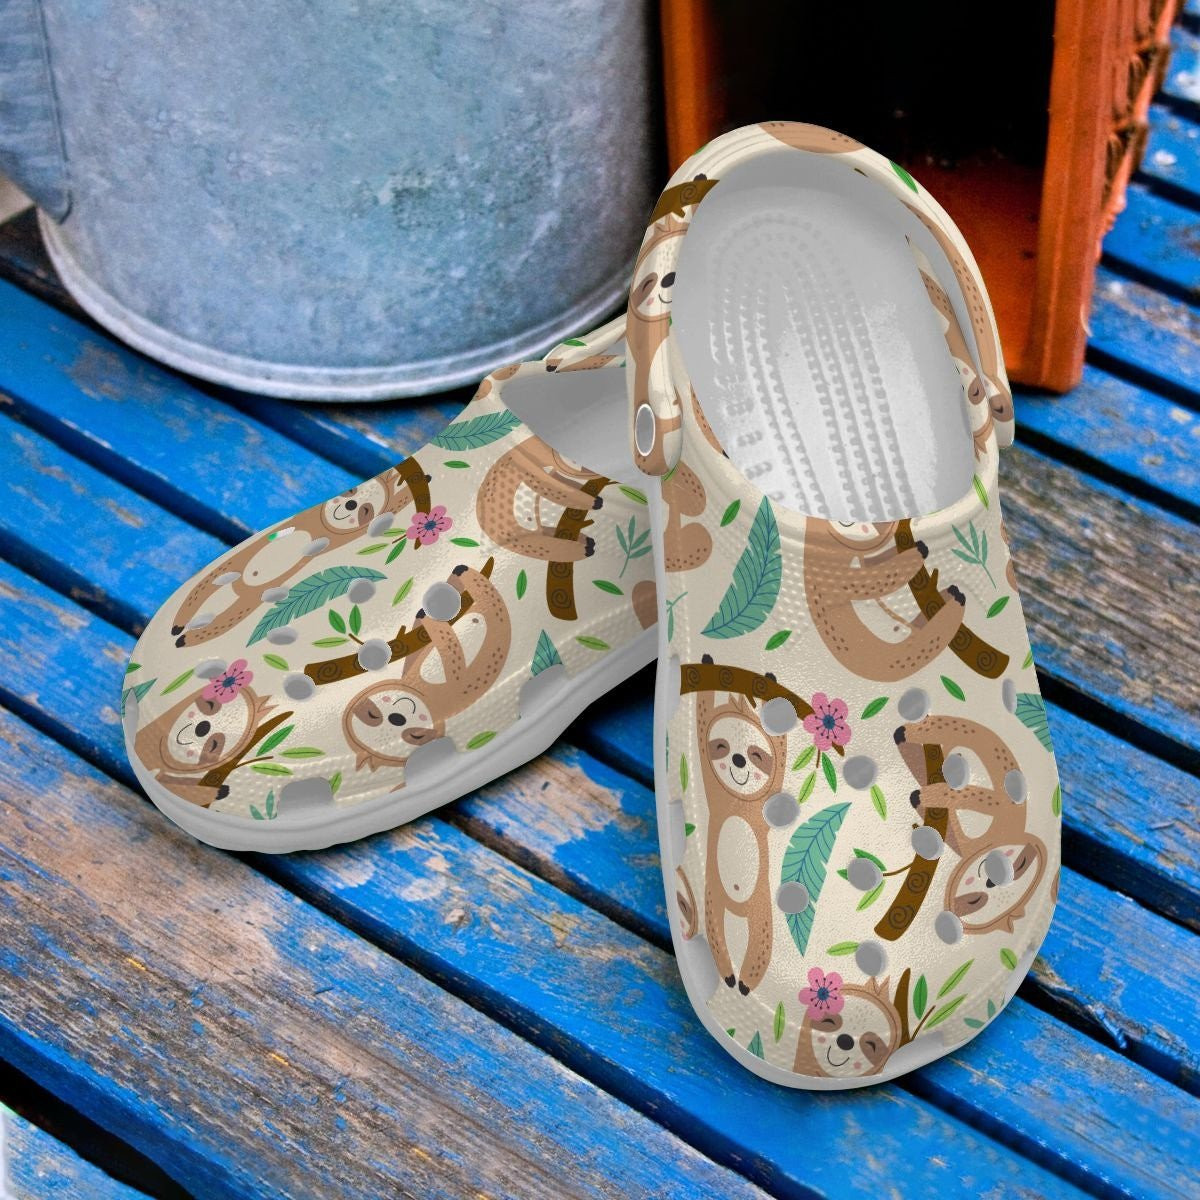 Baby Cute Sloth Shoes - Funny Animal Crocs Clog Gift For Boy Girl Son Daughter